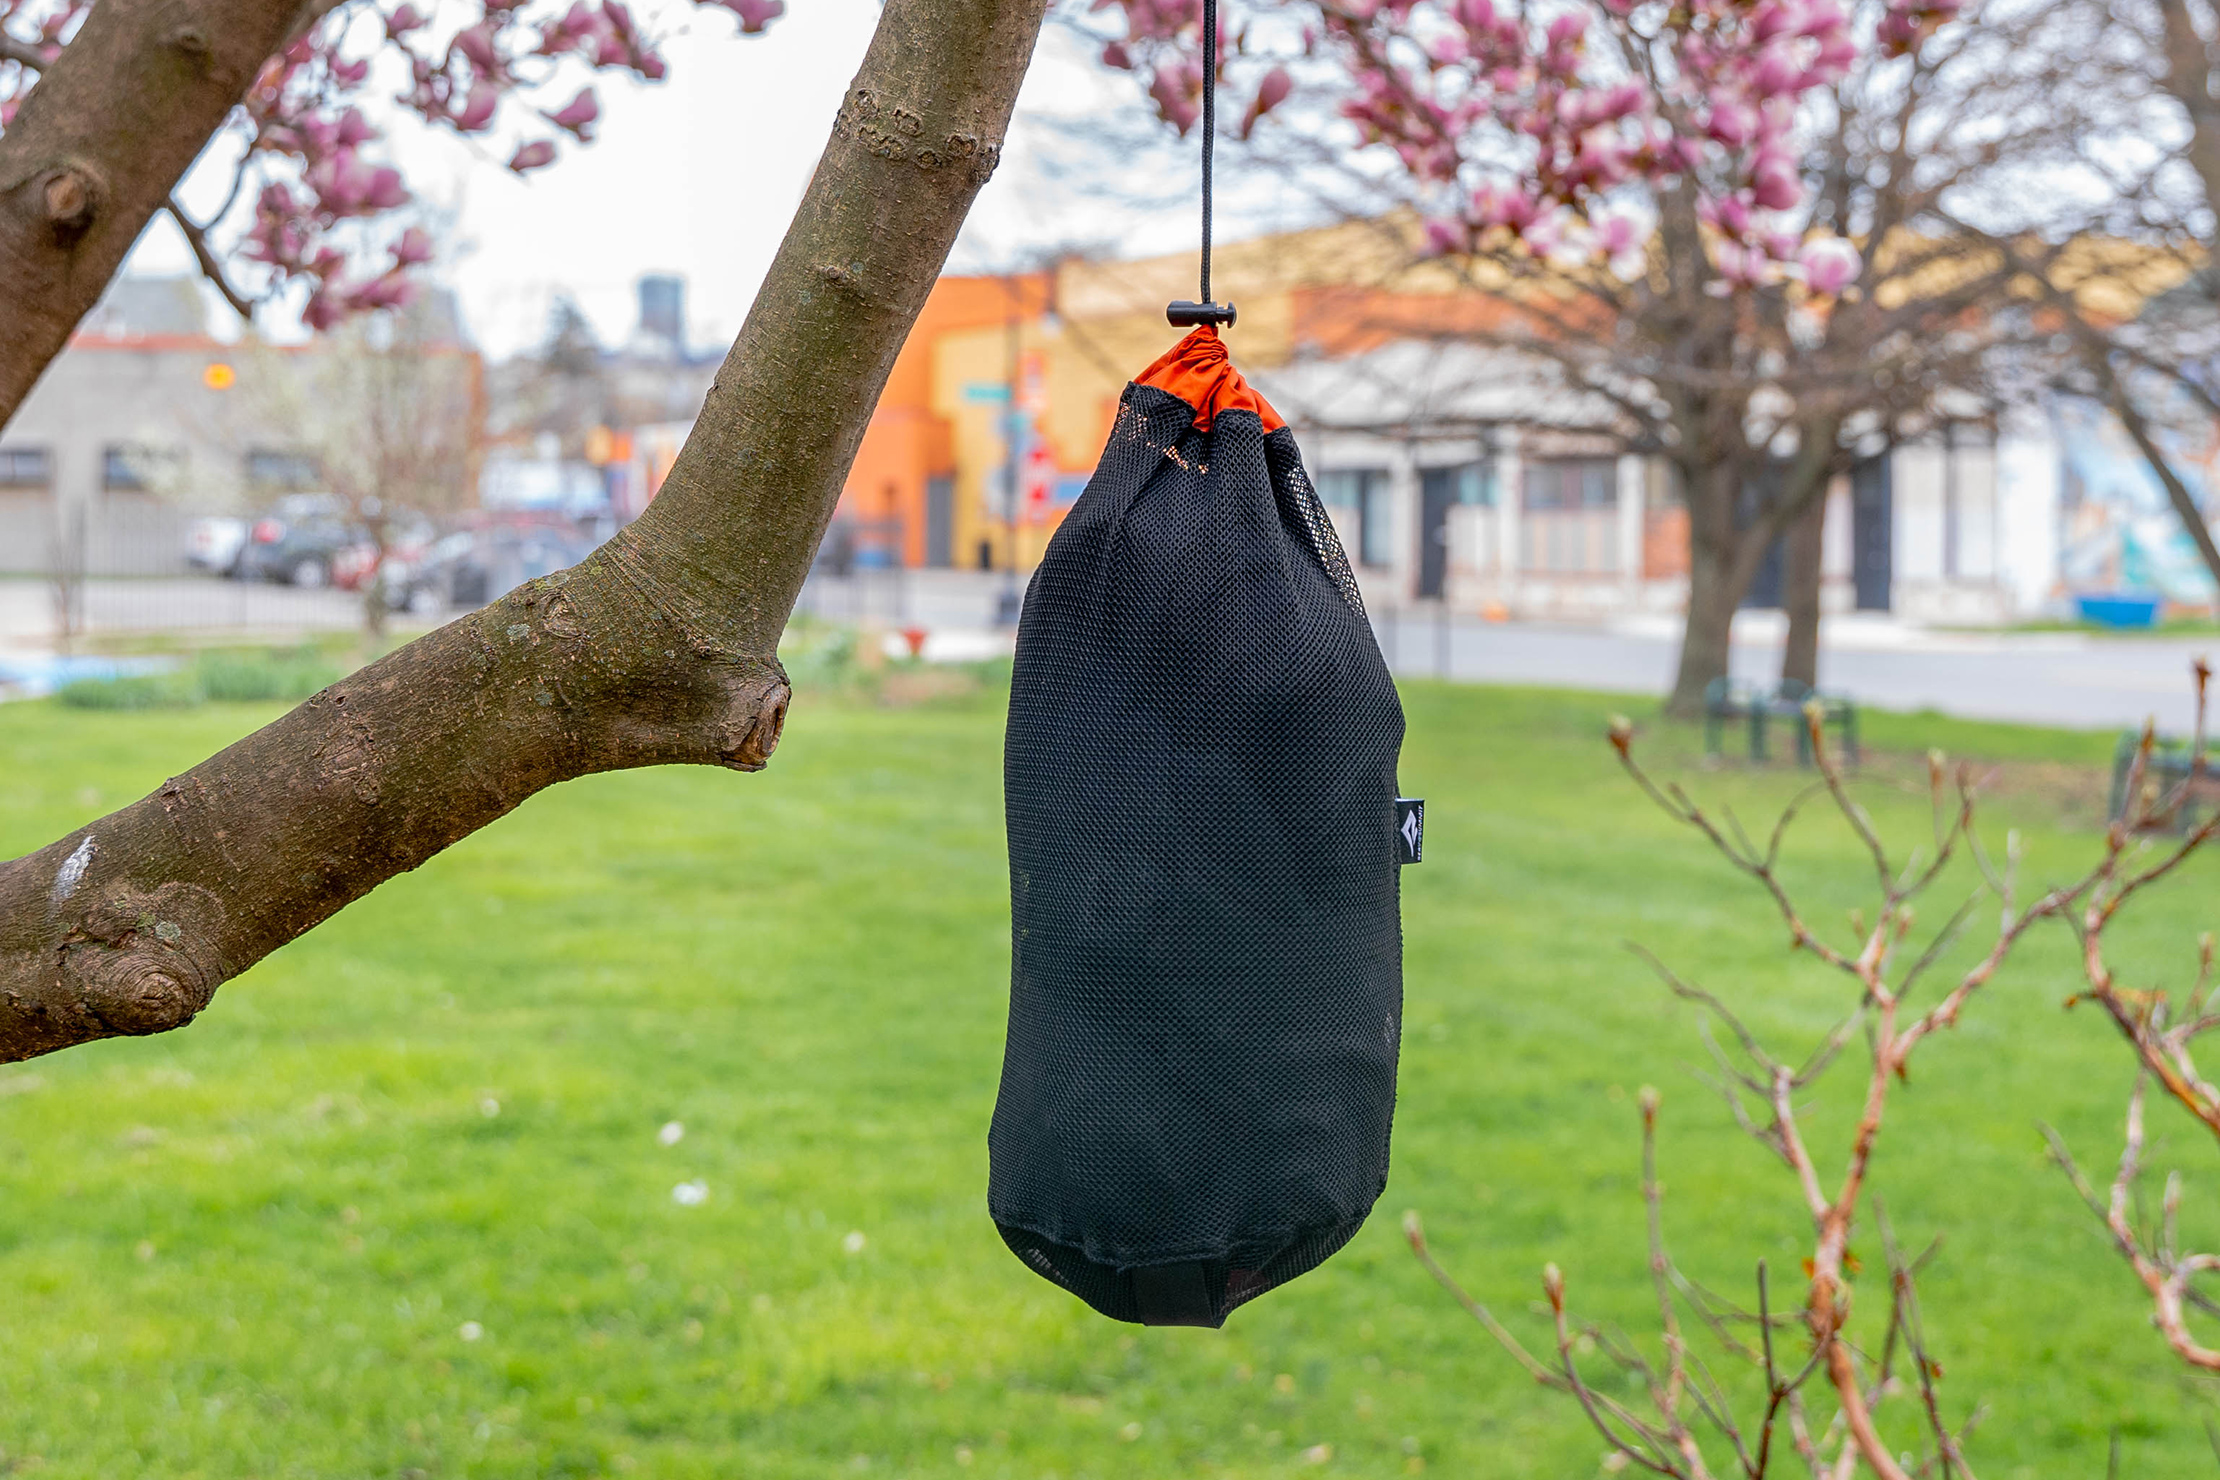 Sea To Summit Mesh Sack Hanging From Tree